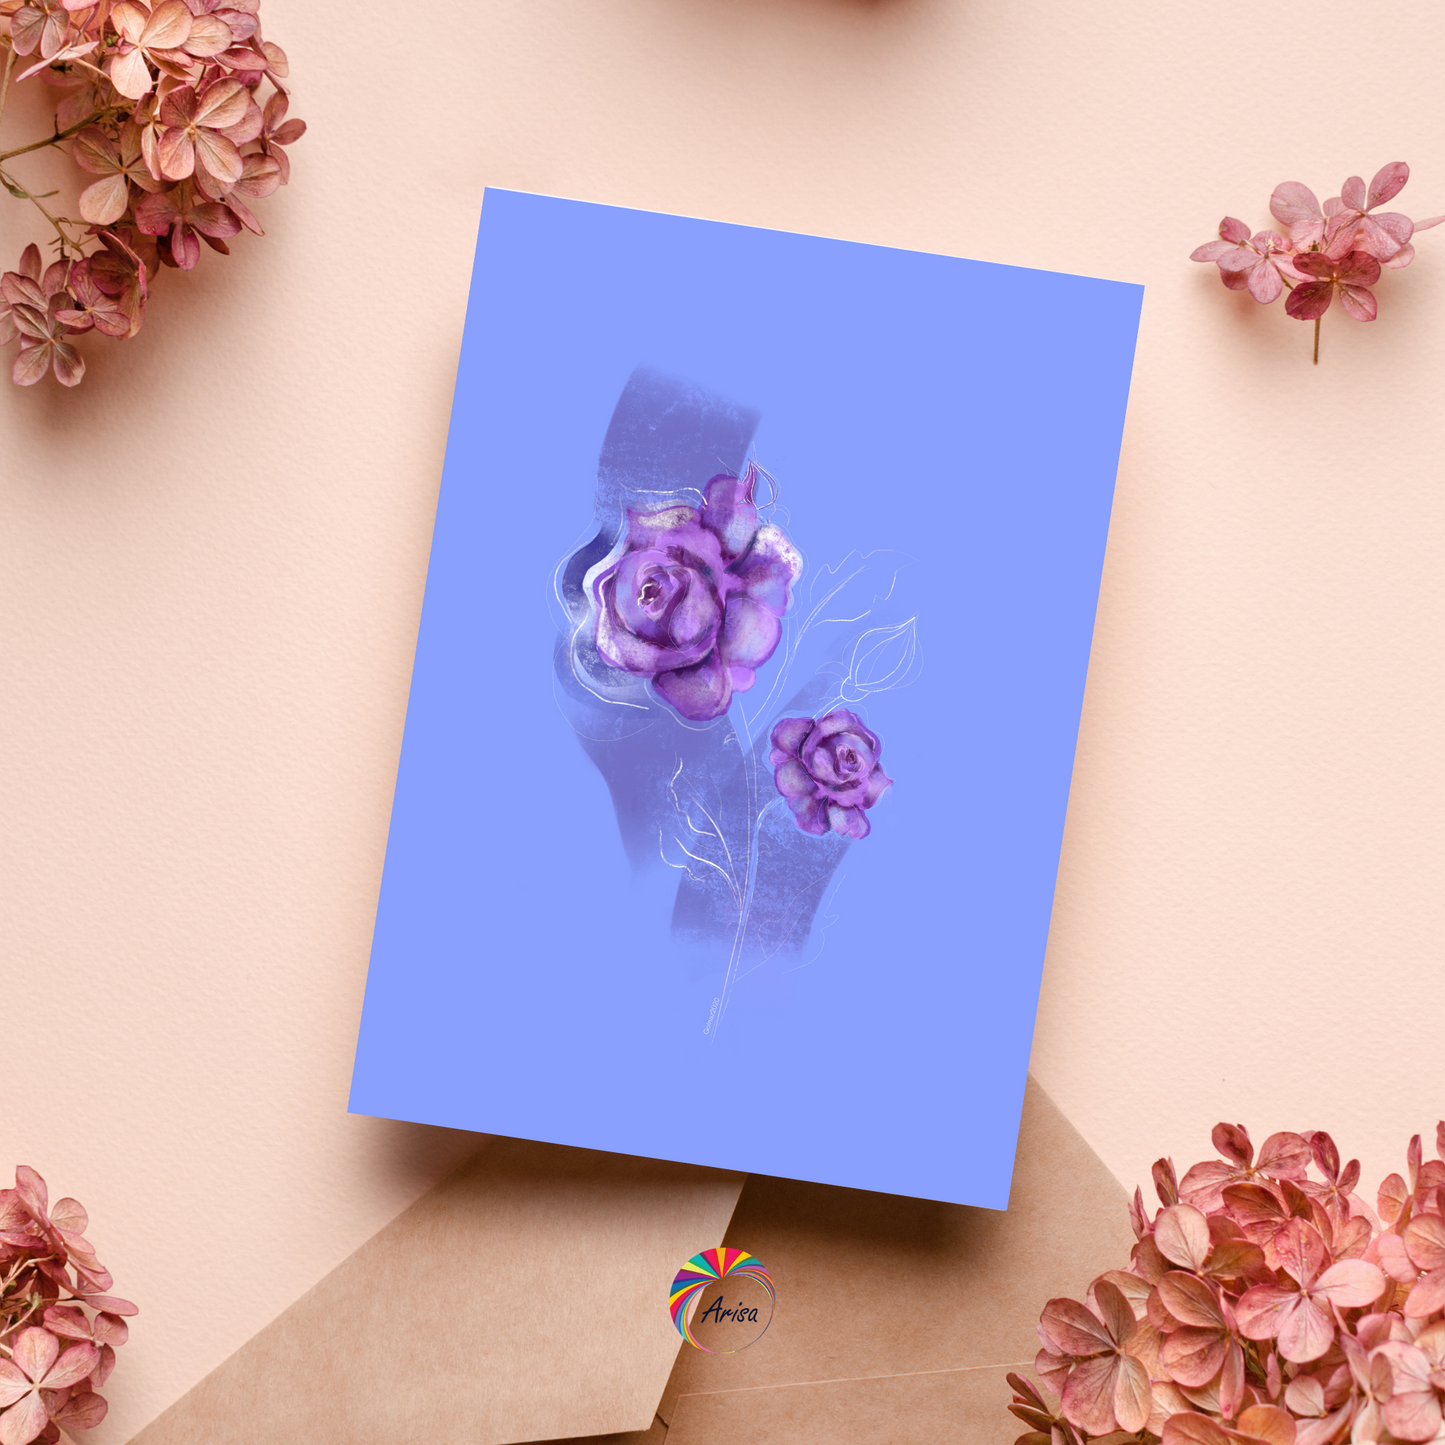 "ROSE" Greeting Card by ArisaTeam in a pink background with flowers.